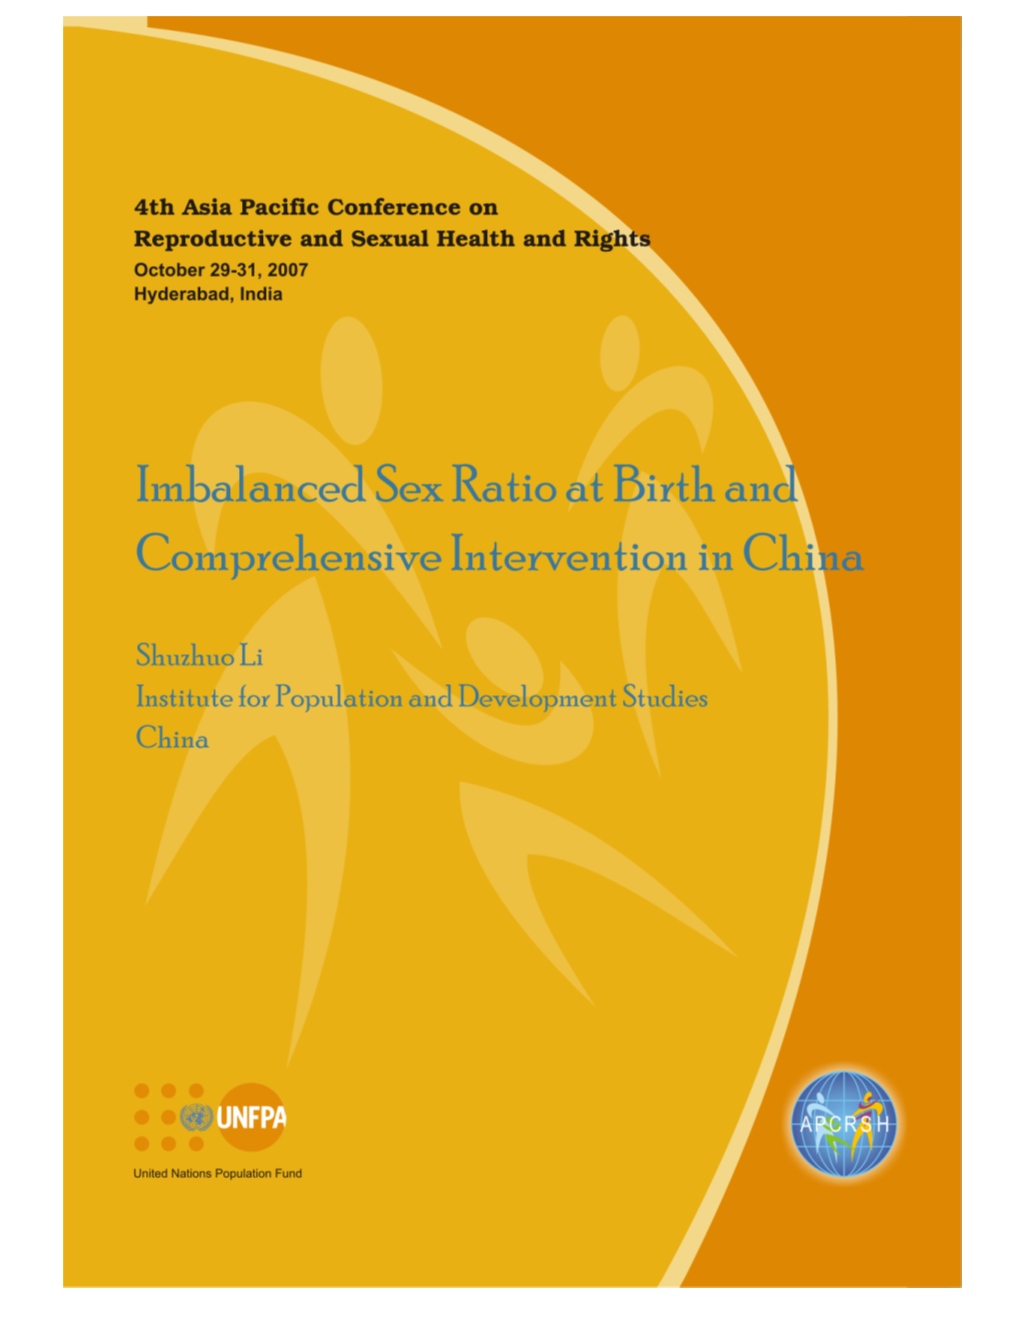 Imbalanced Sex Ratio at Birth and Comprehensive Intervention in China